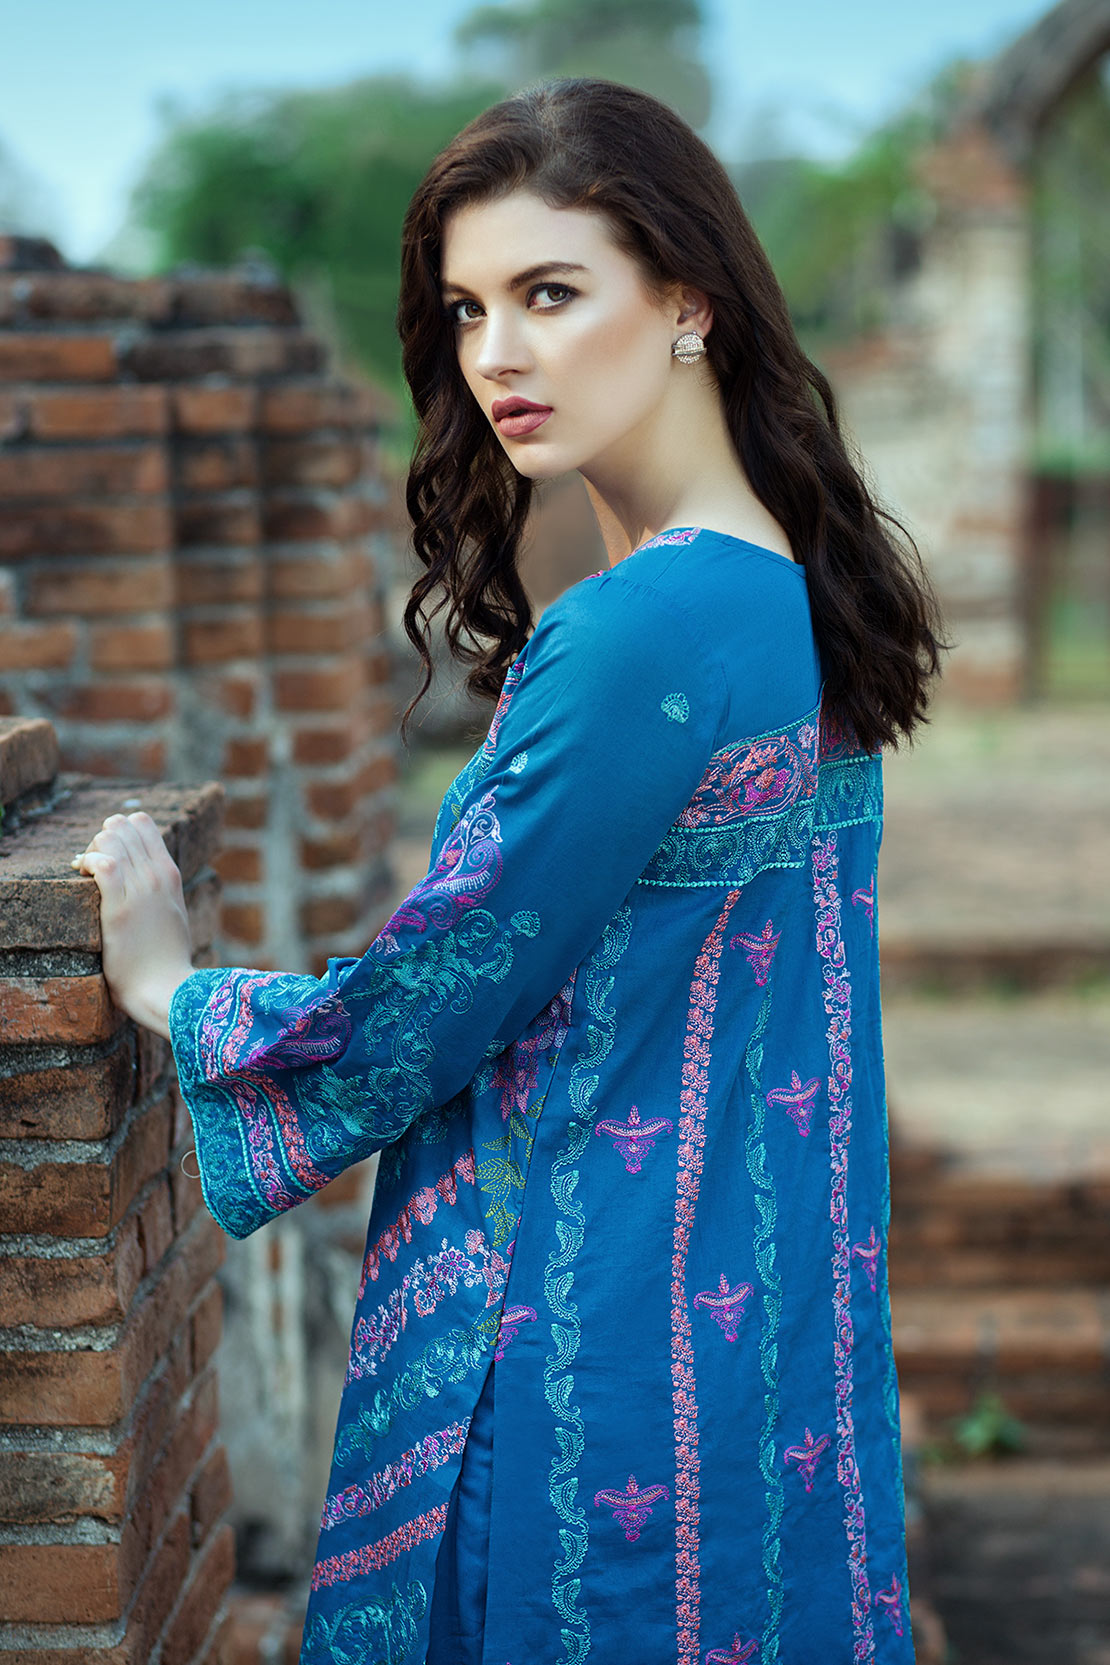 This spring get dressed in beautiful and elegant dresses by Taana Baana spring embroidered 2019 collection